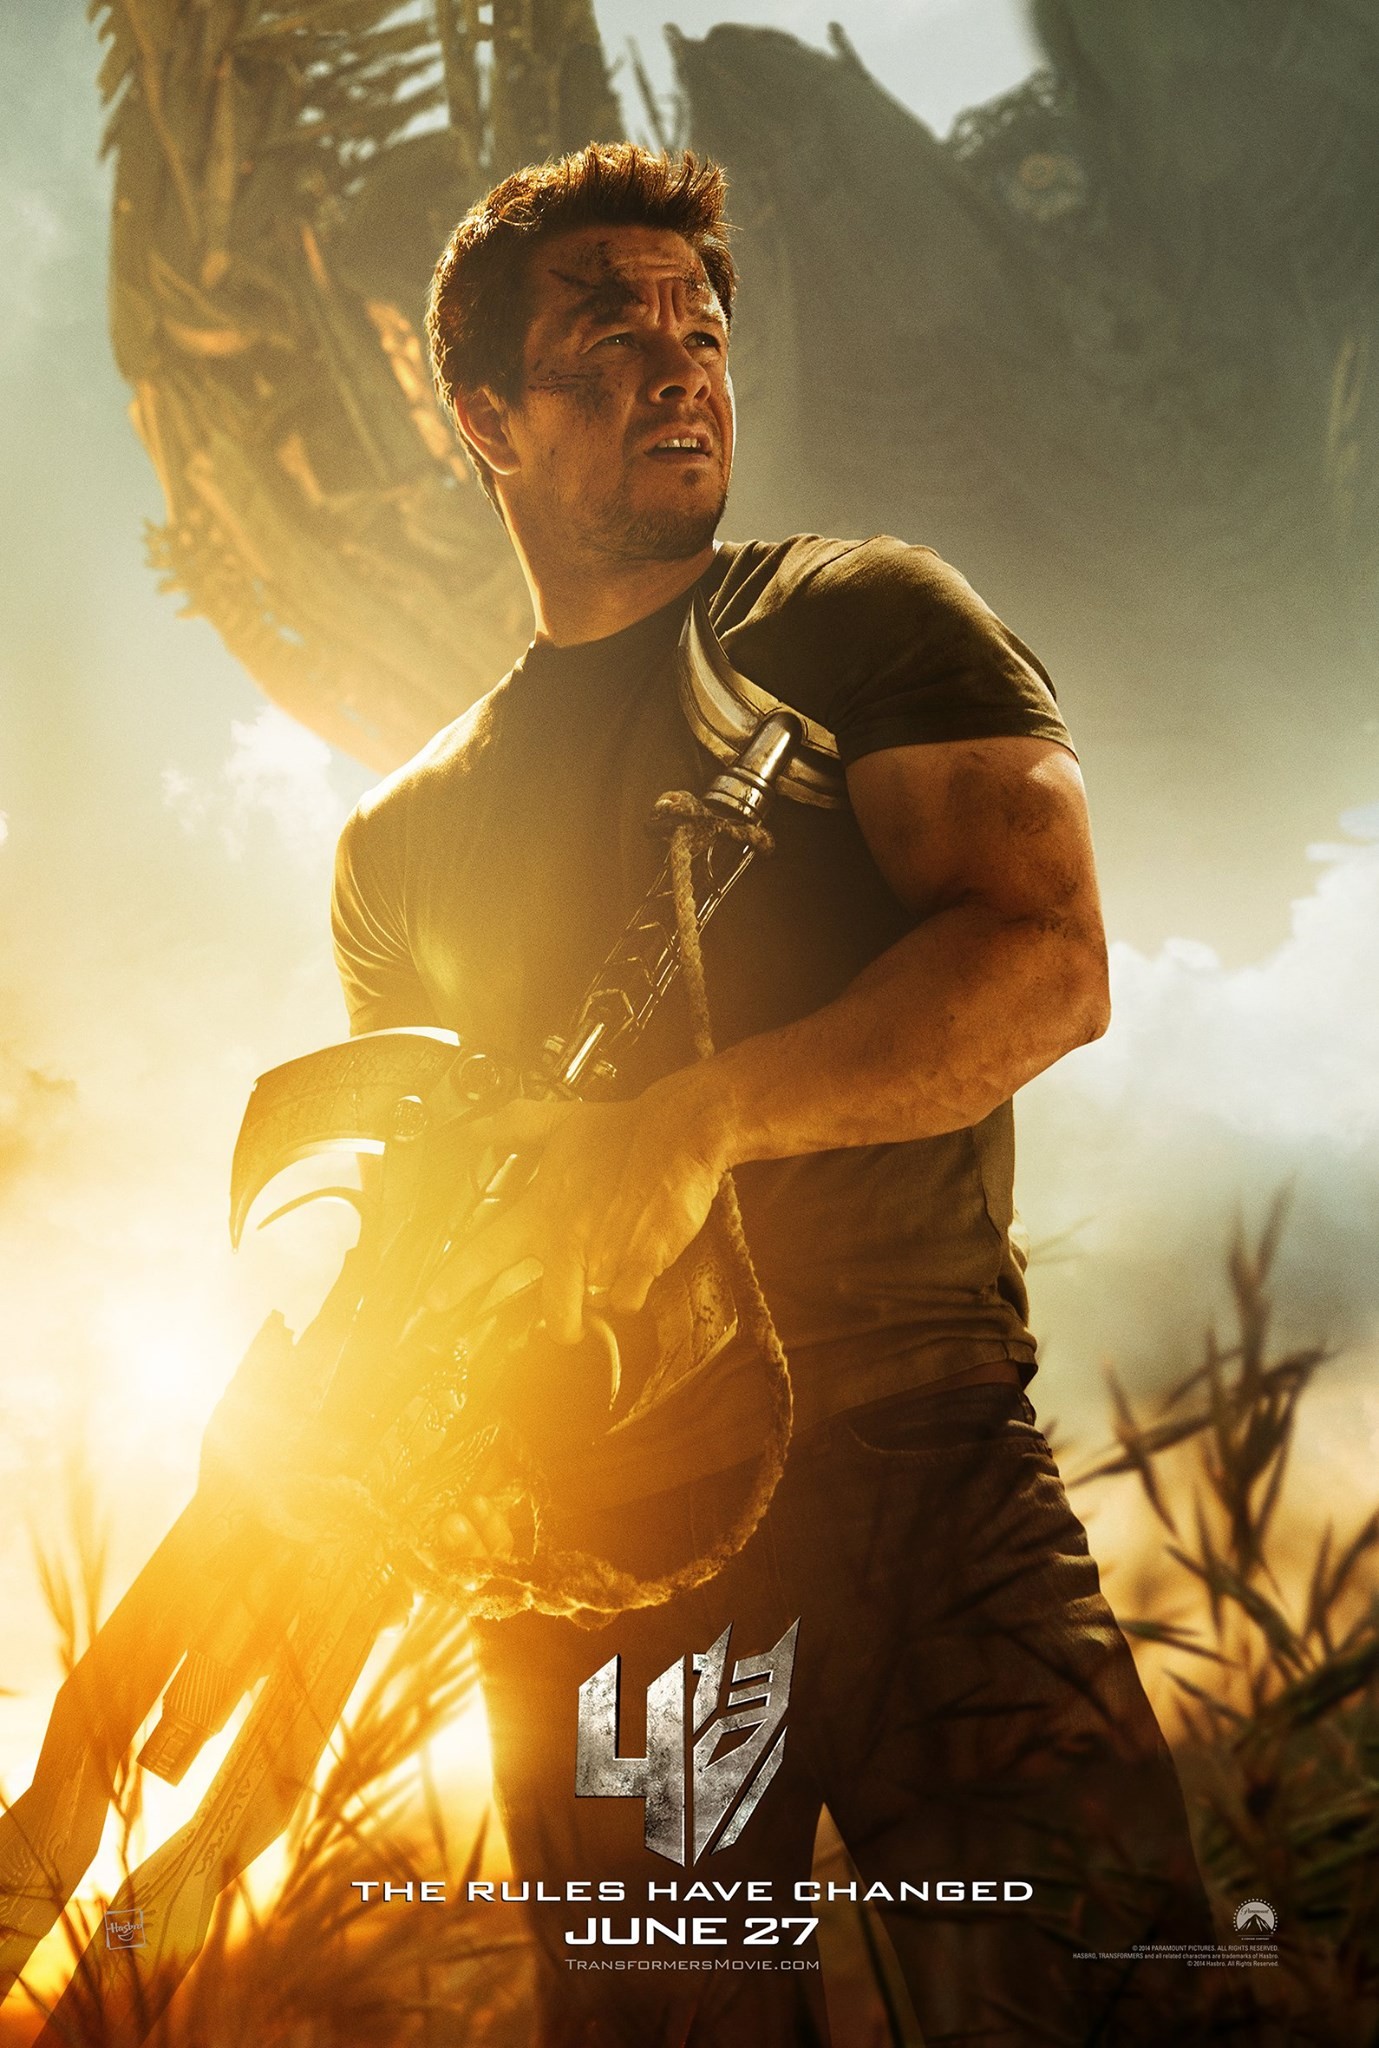 Transformers Age of Extinction-Official Poster Banner PROMO XXLG-05MARÇO2014-01